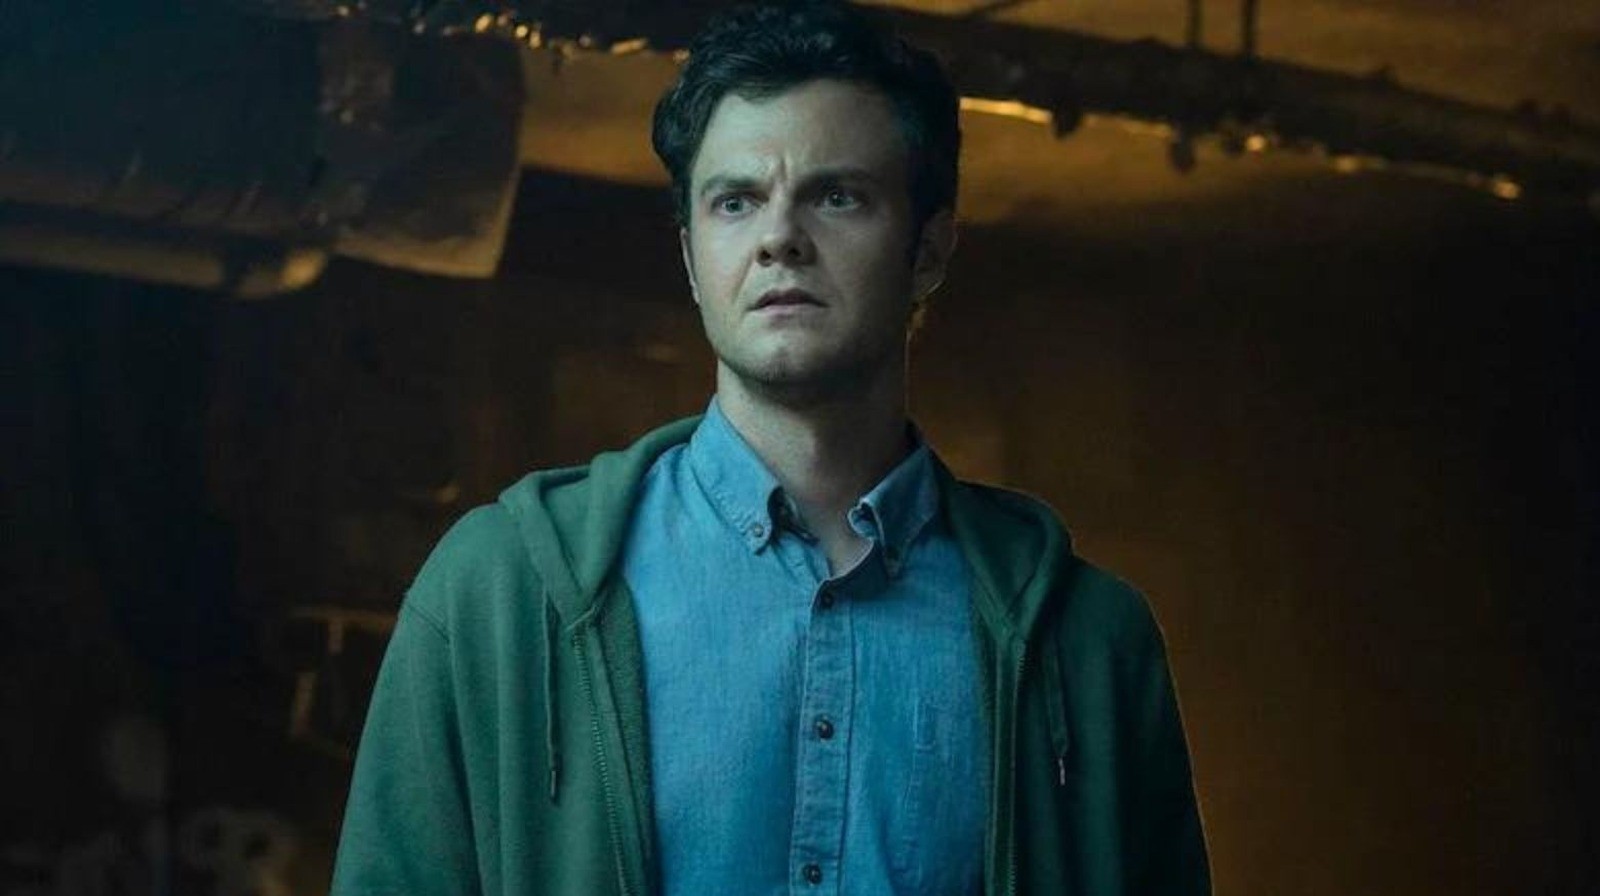 Jack Quaid is dating his on-screen enemy in real life